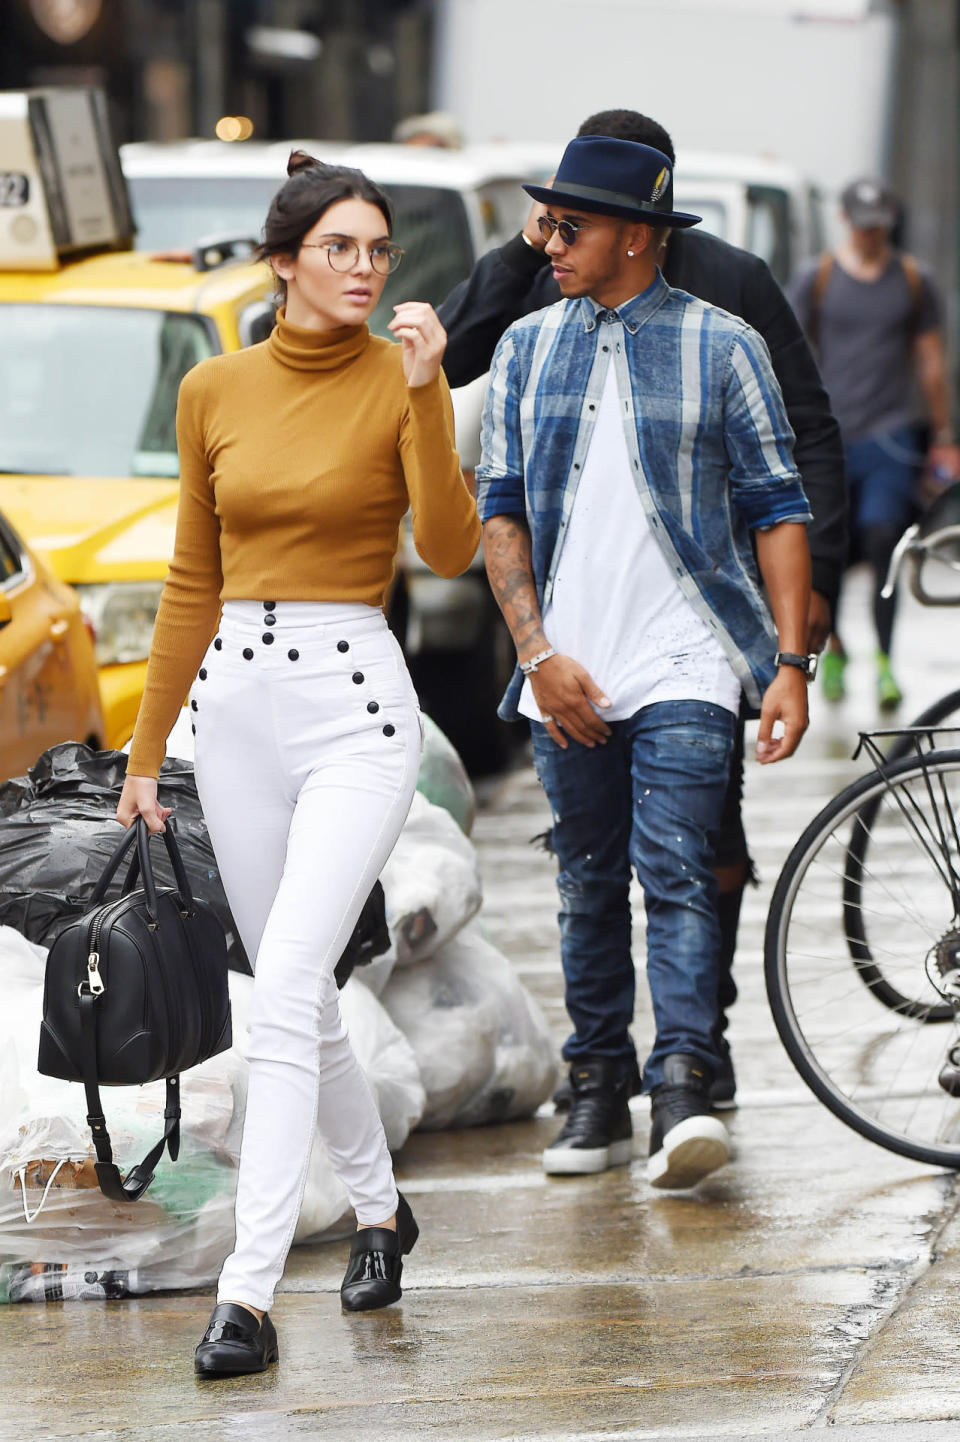 Kendall Jenner in New York City with Lewis Hamilton on Sept. 10.